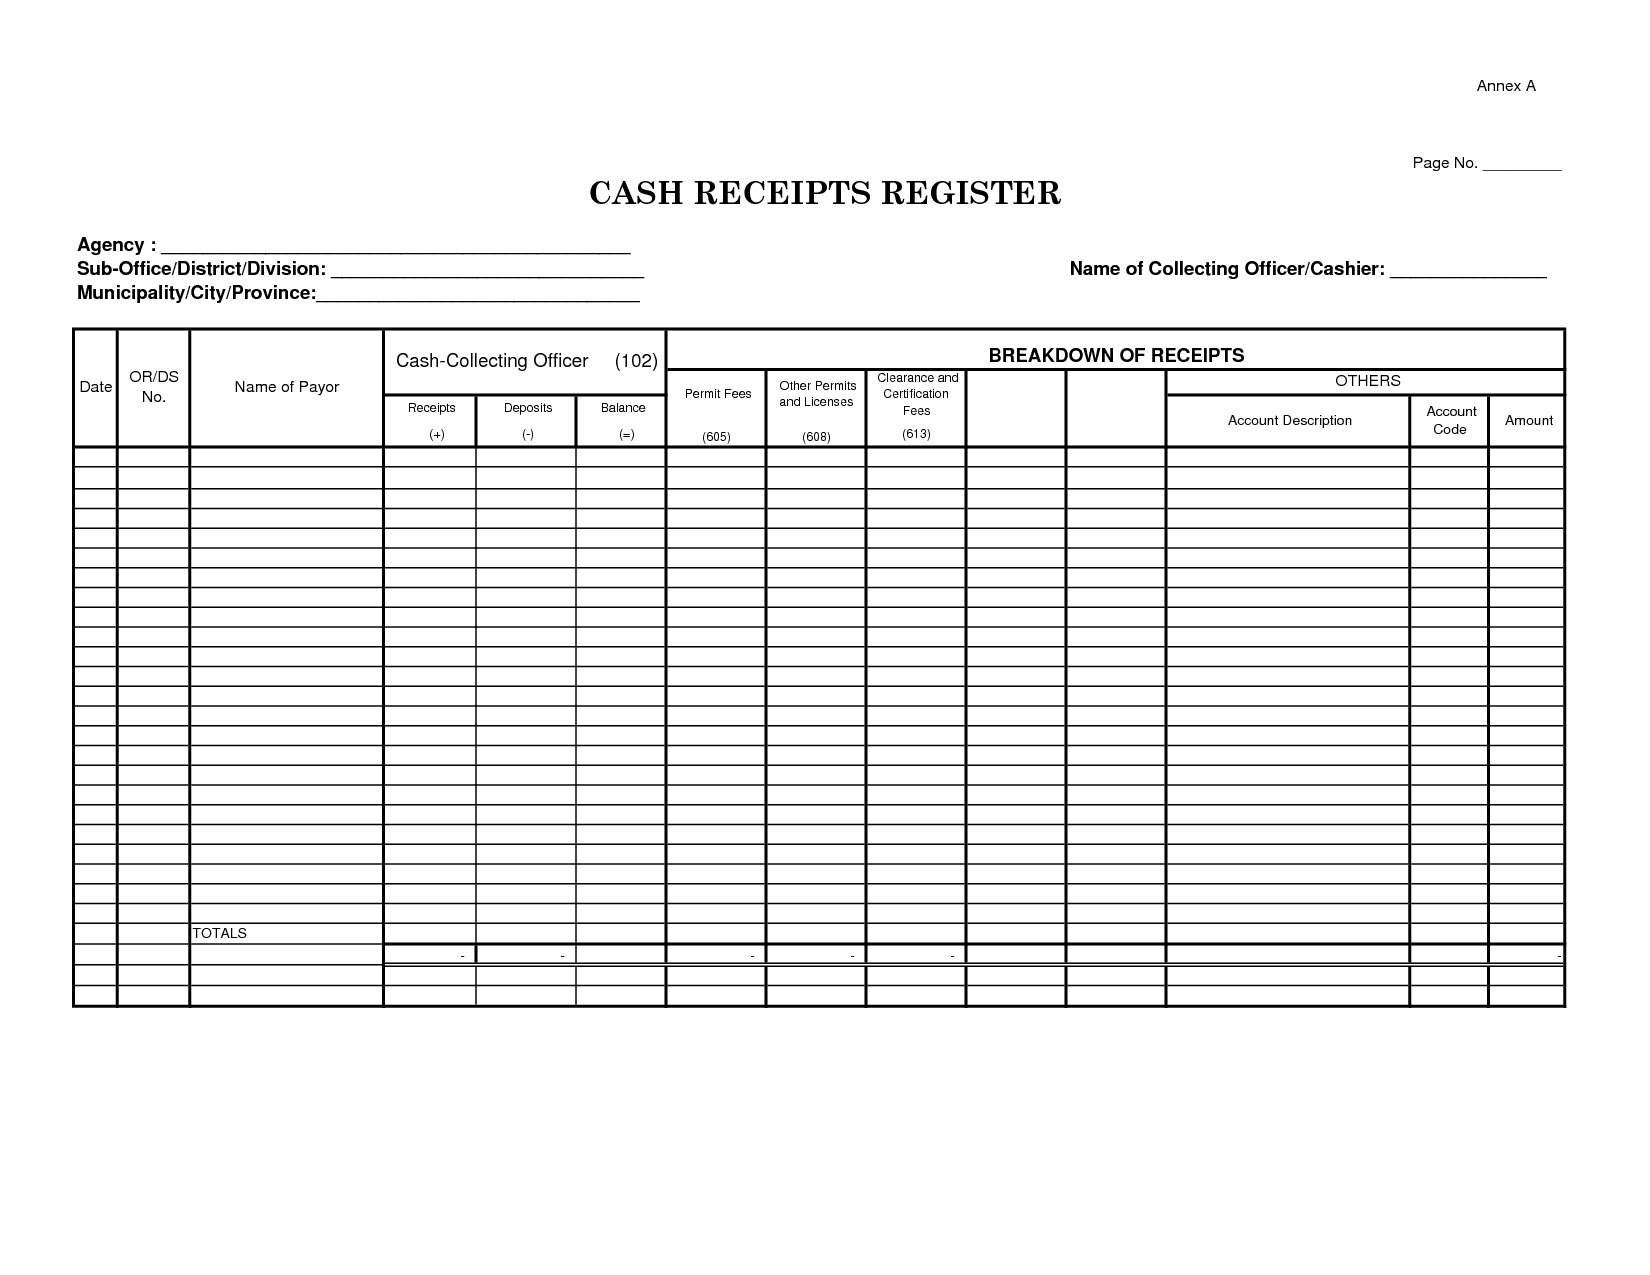 Free Accounting Templates Excel Worksheets 1